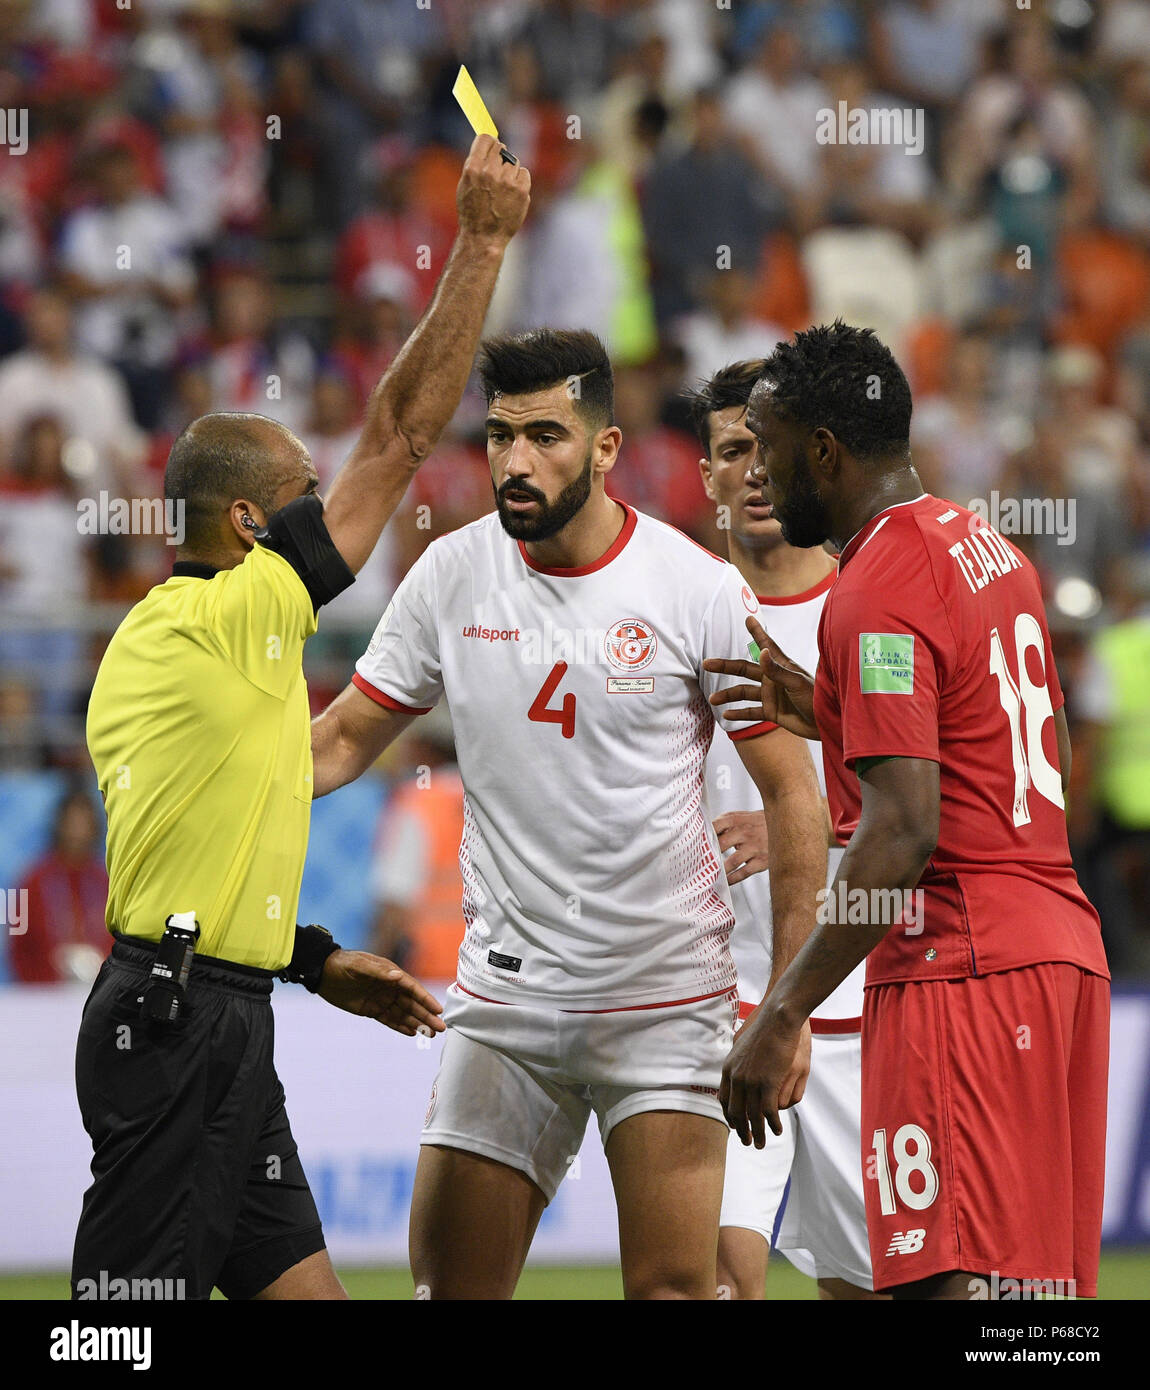 Saransk, Russia. 28th June, 2018. Yassine Meriah (2nd L) of Tunisia reacts during the 2018 FIFA World Cup Group G match between Panama and Tunisia in Saransk, Russia, June 28, 2018. Tunisia won 2-1. Credit: Lui Siu Wai/Xinhua/Alamy Live News Stock Photo